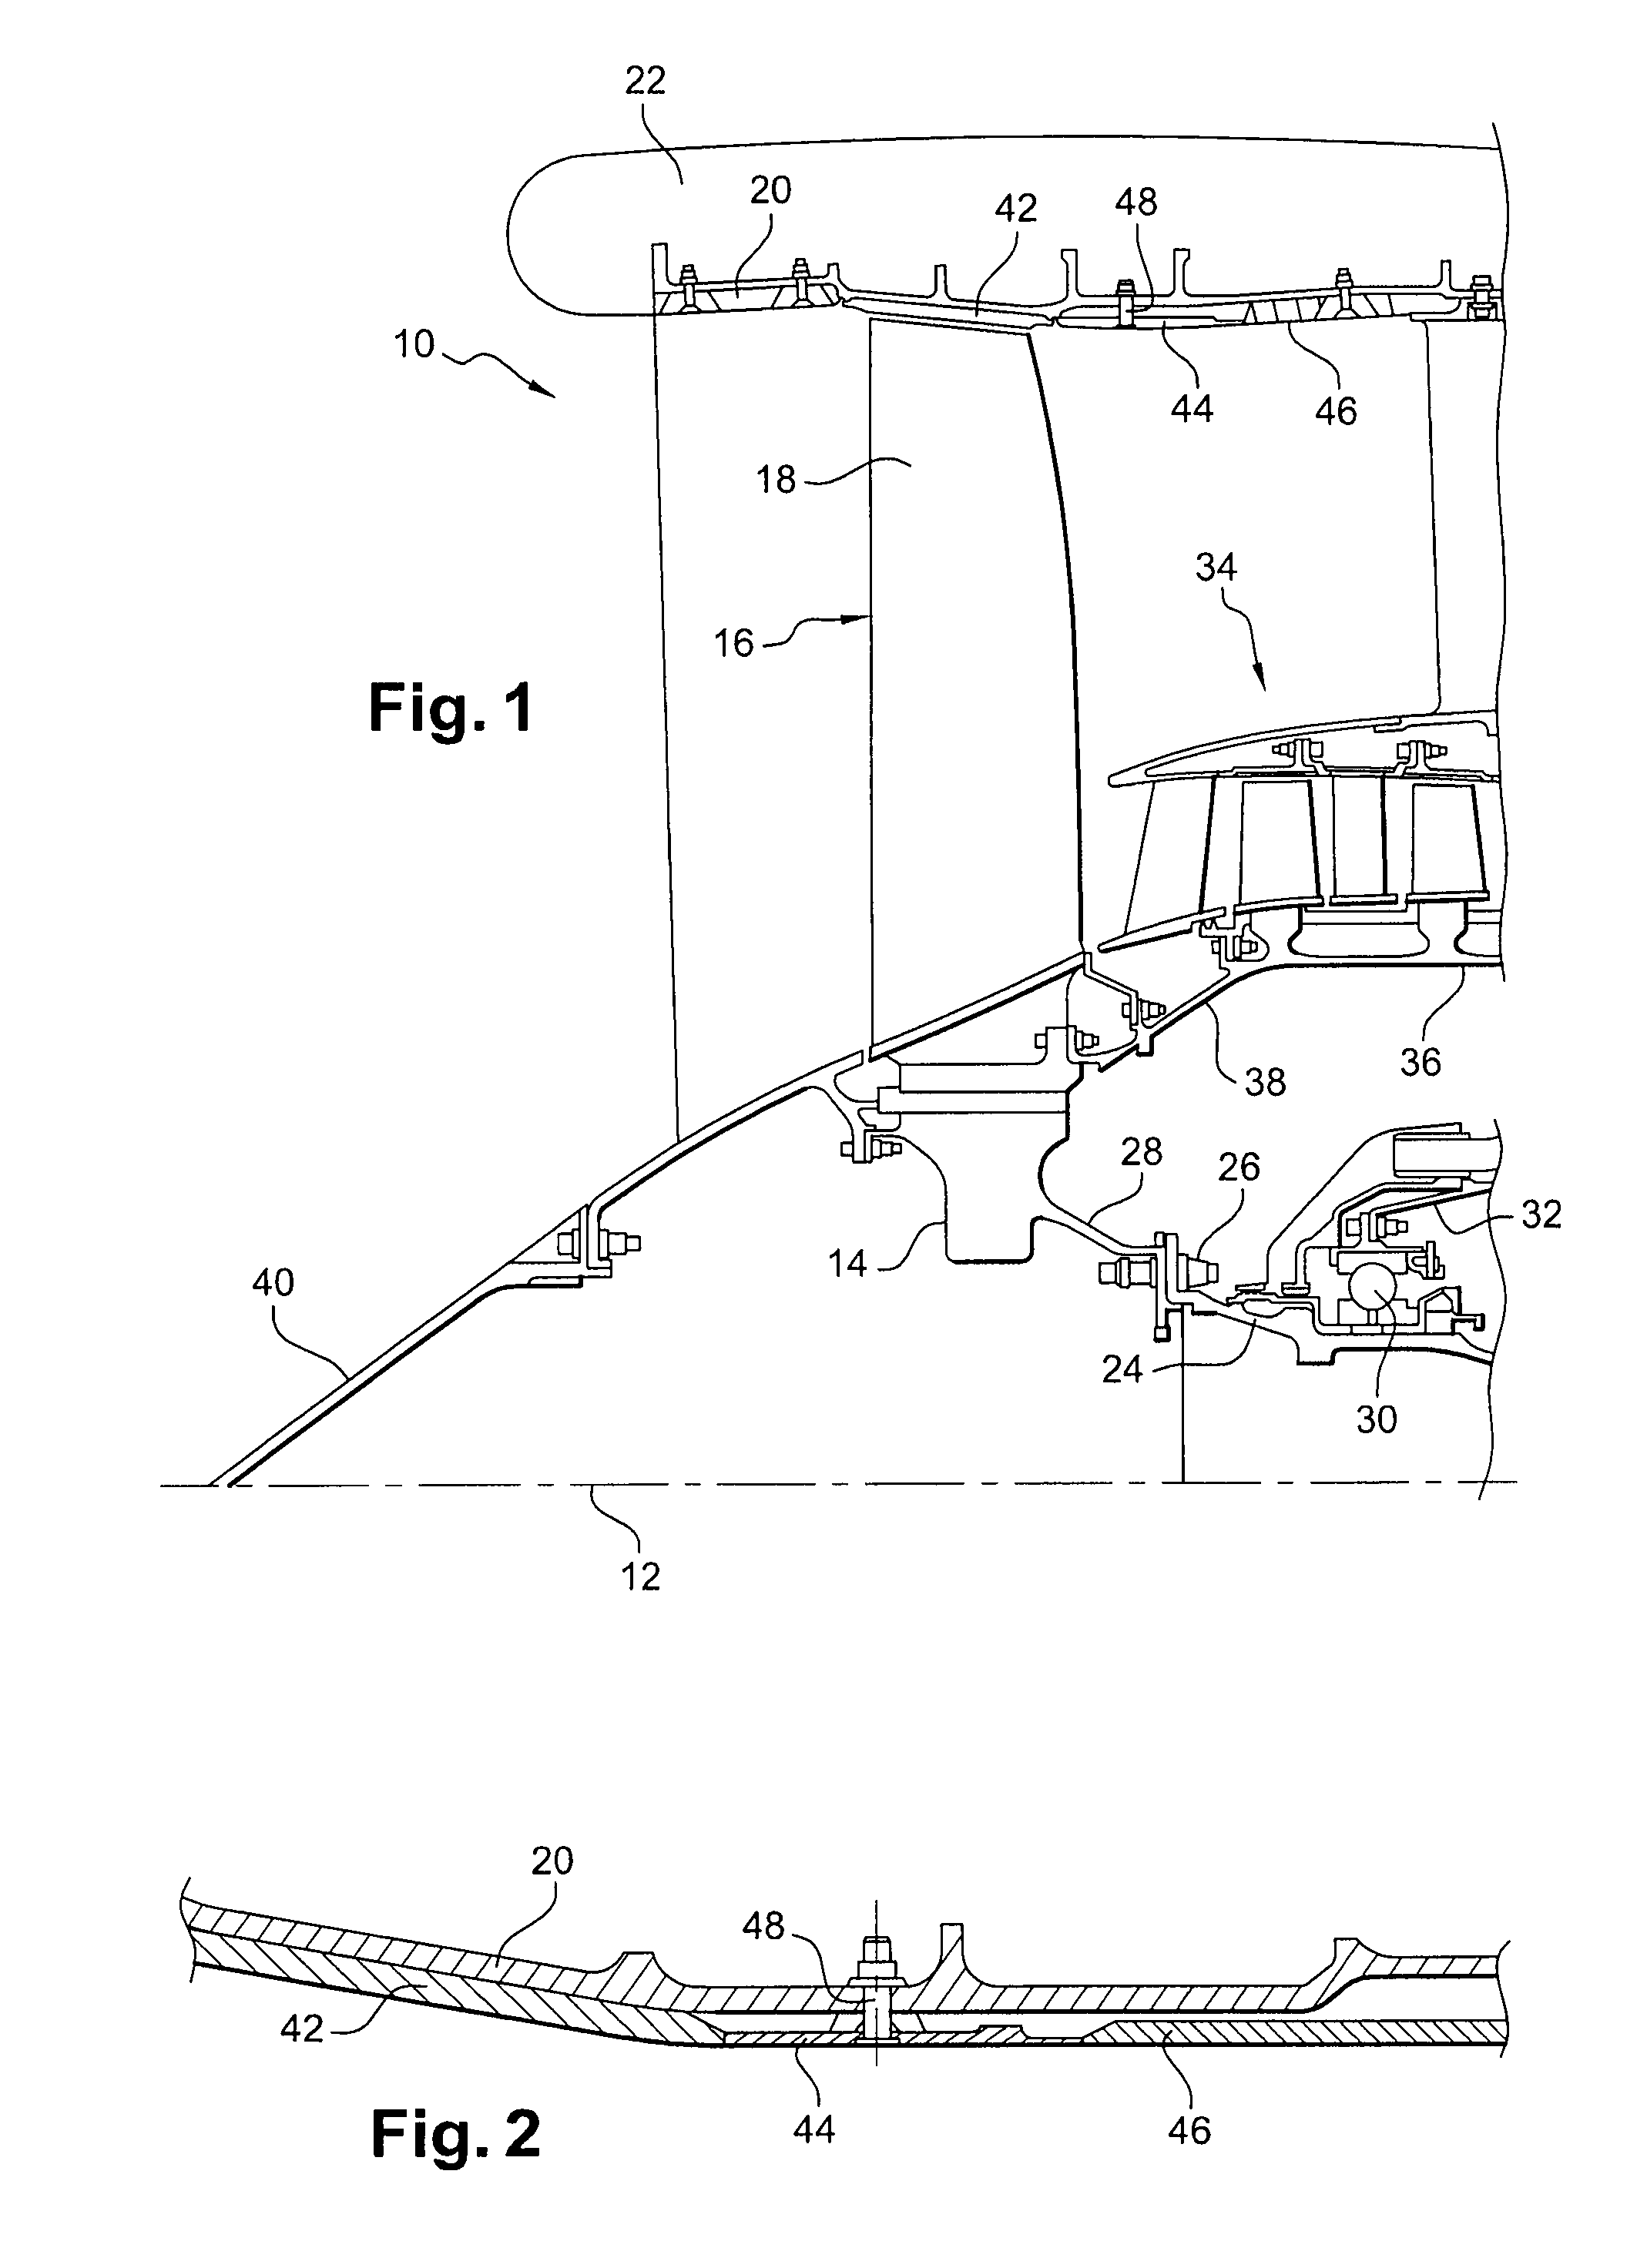 Panel for supporting abradable material in a turbomachine